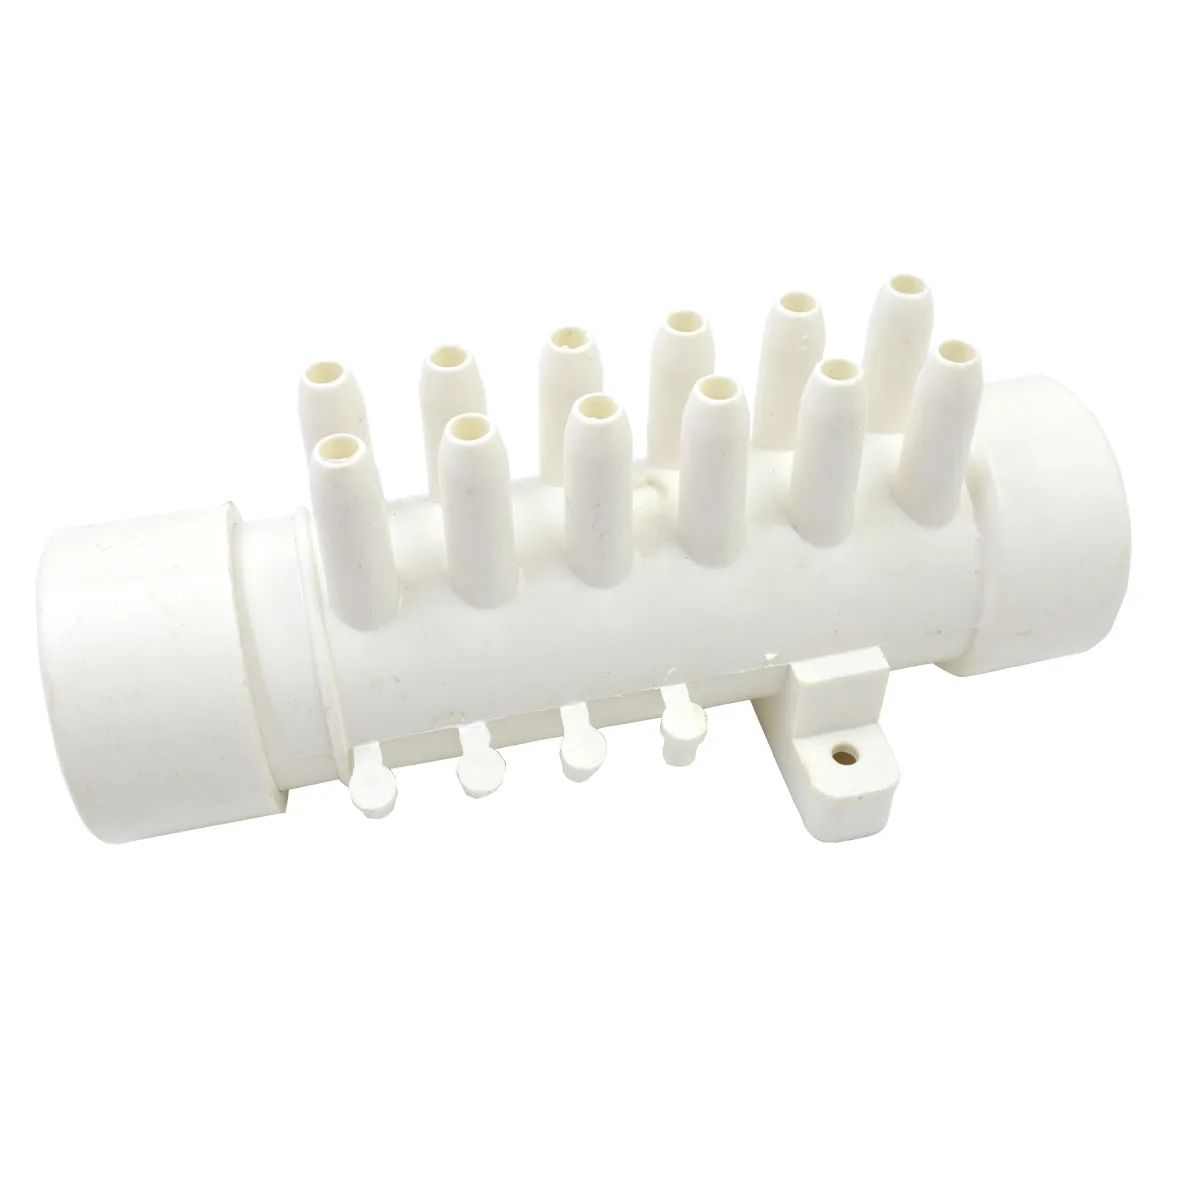 

1.5" PVC Manifold water distributor with 12 holes PVC air Manifold 11mm air distributor for bathtub hot tub spa